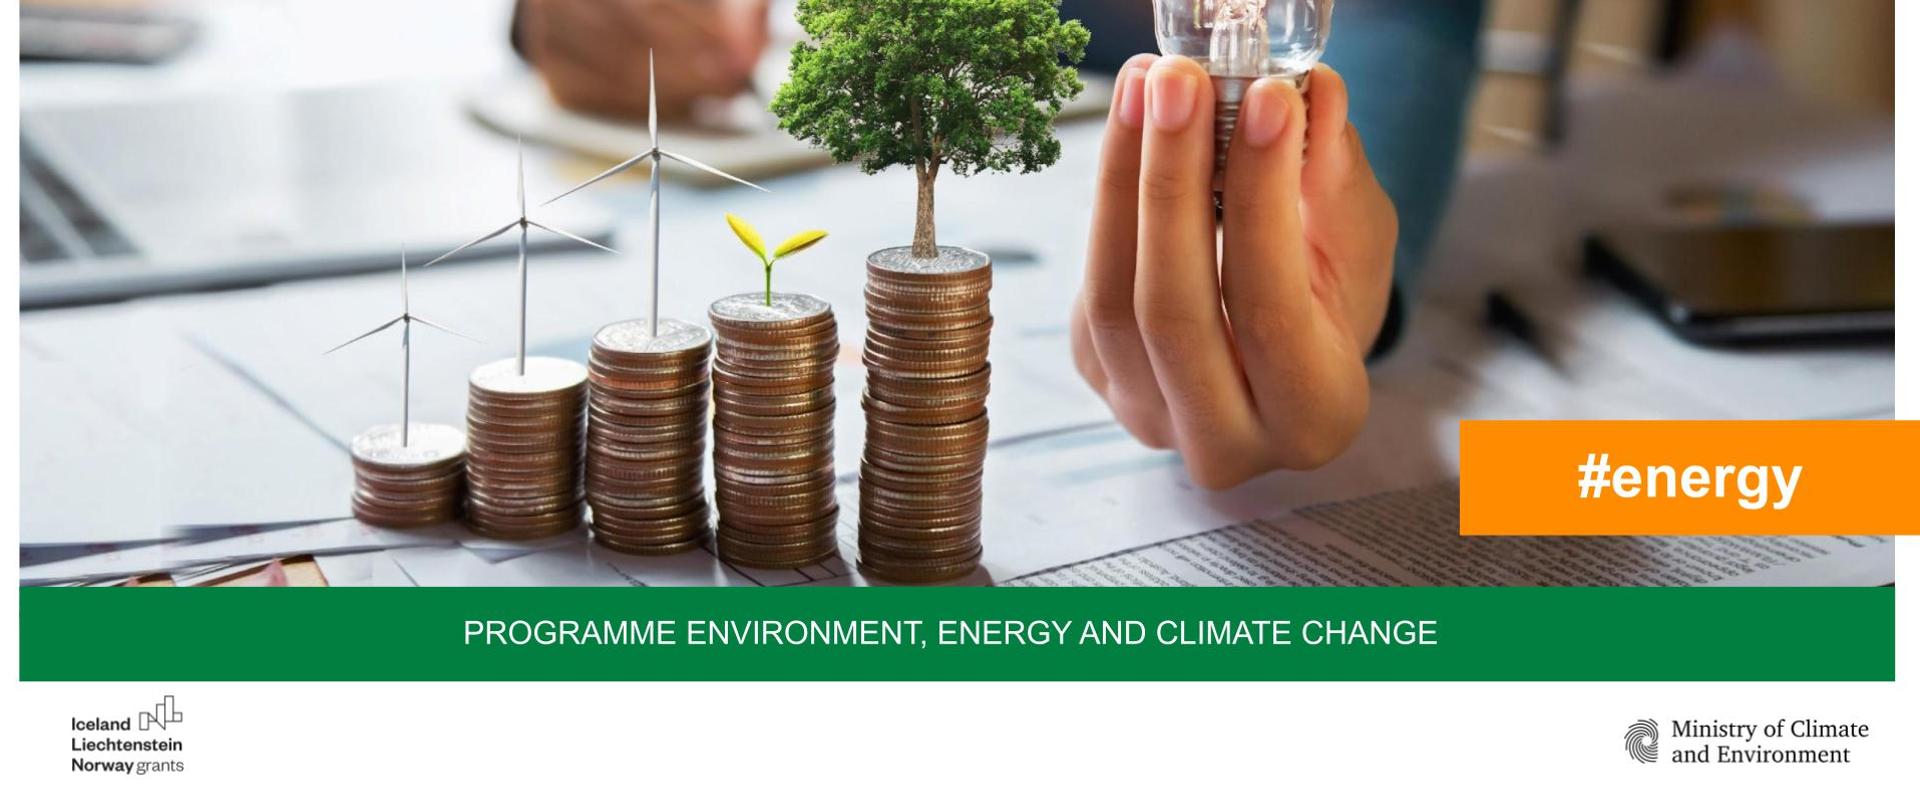 Environment Energy and Climate Change Programme #energy 